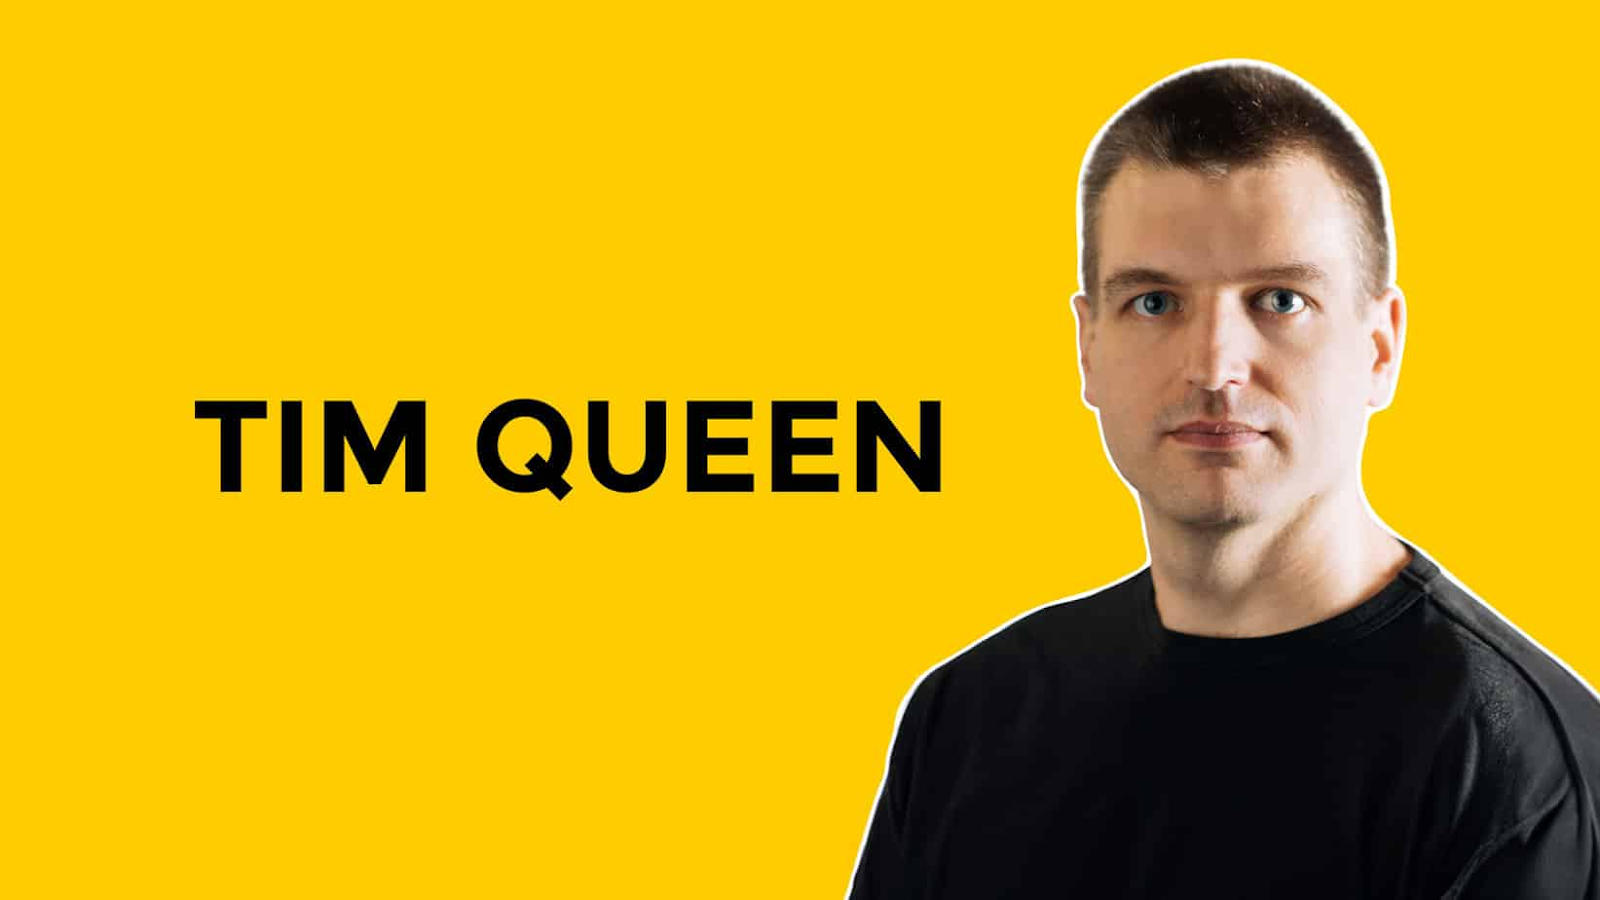 Tim Queen at the Yellow Background